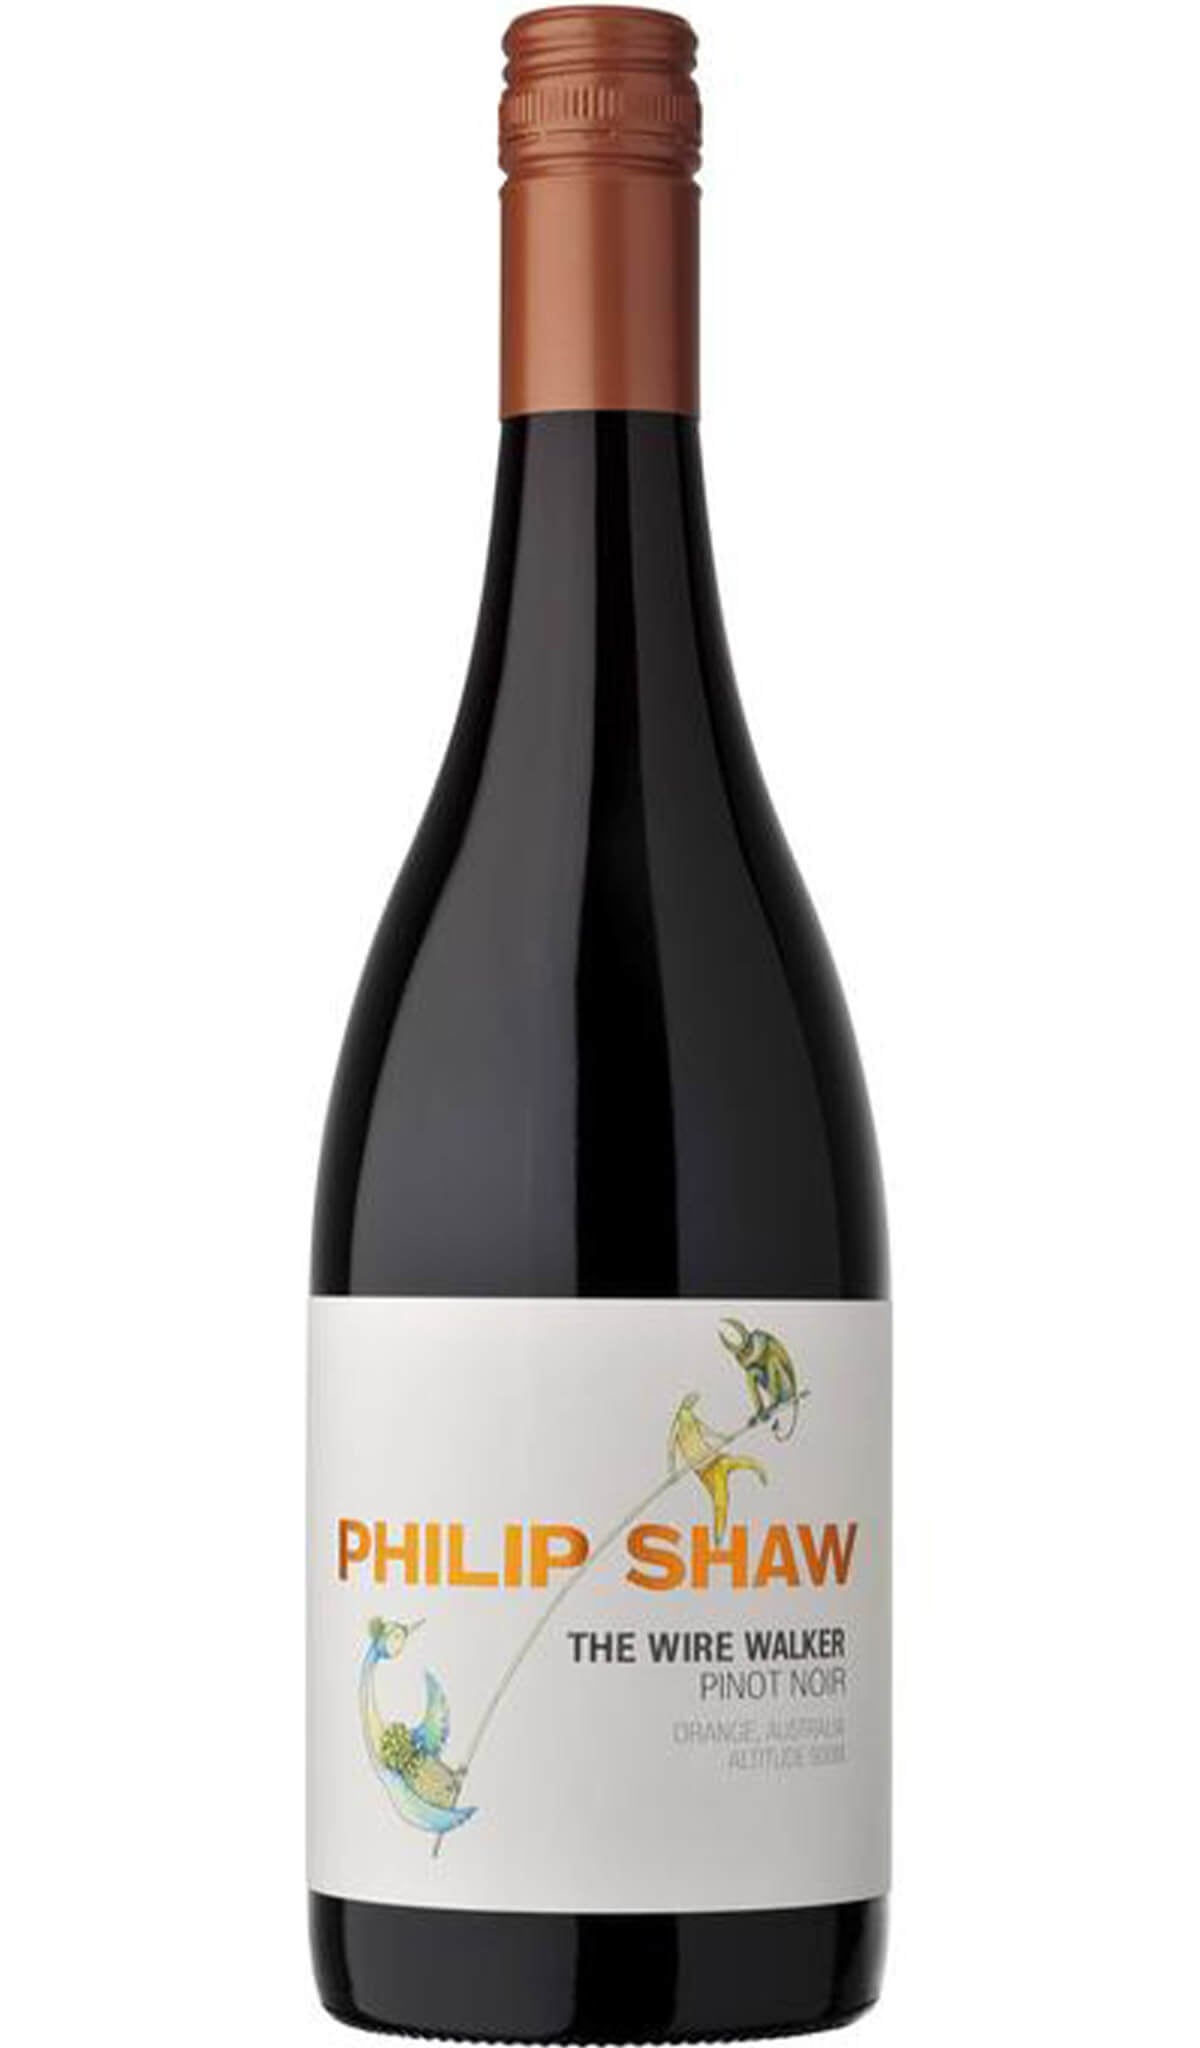 Find out more or buy Philip Shaw The Wire Walker Pinot Noir 2023 online at Wine Sellers Direct - Australia’s independent liquor specialists.